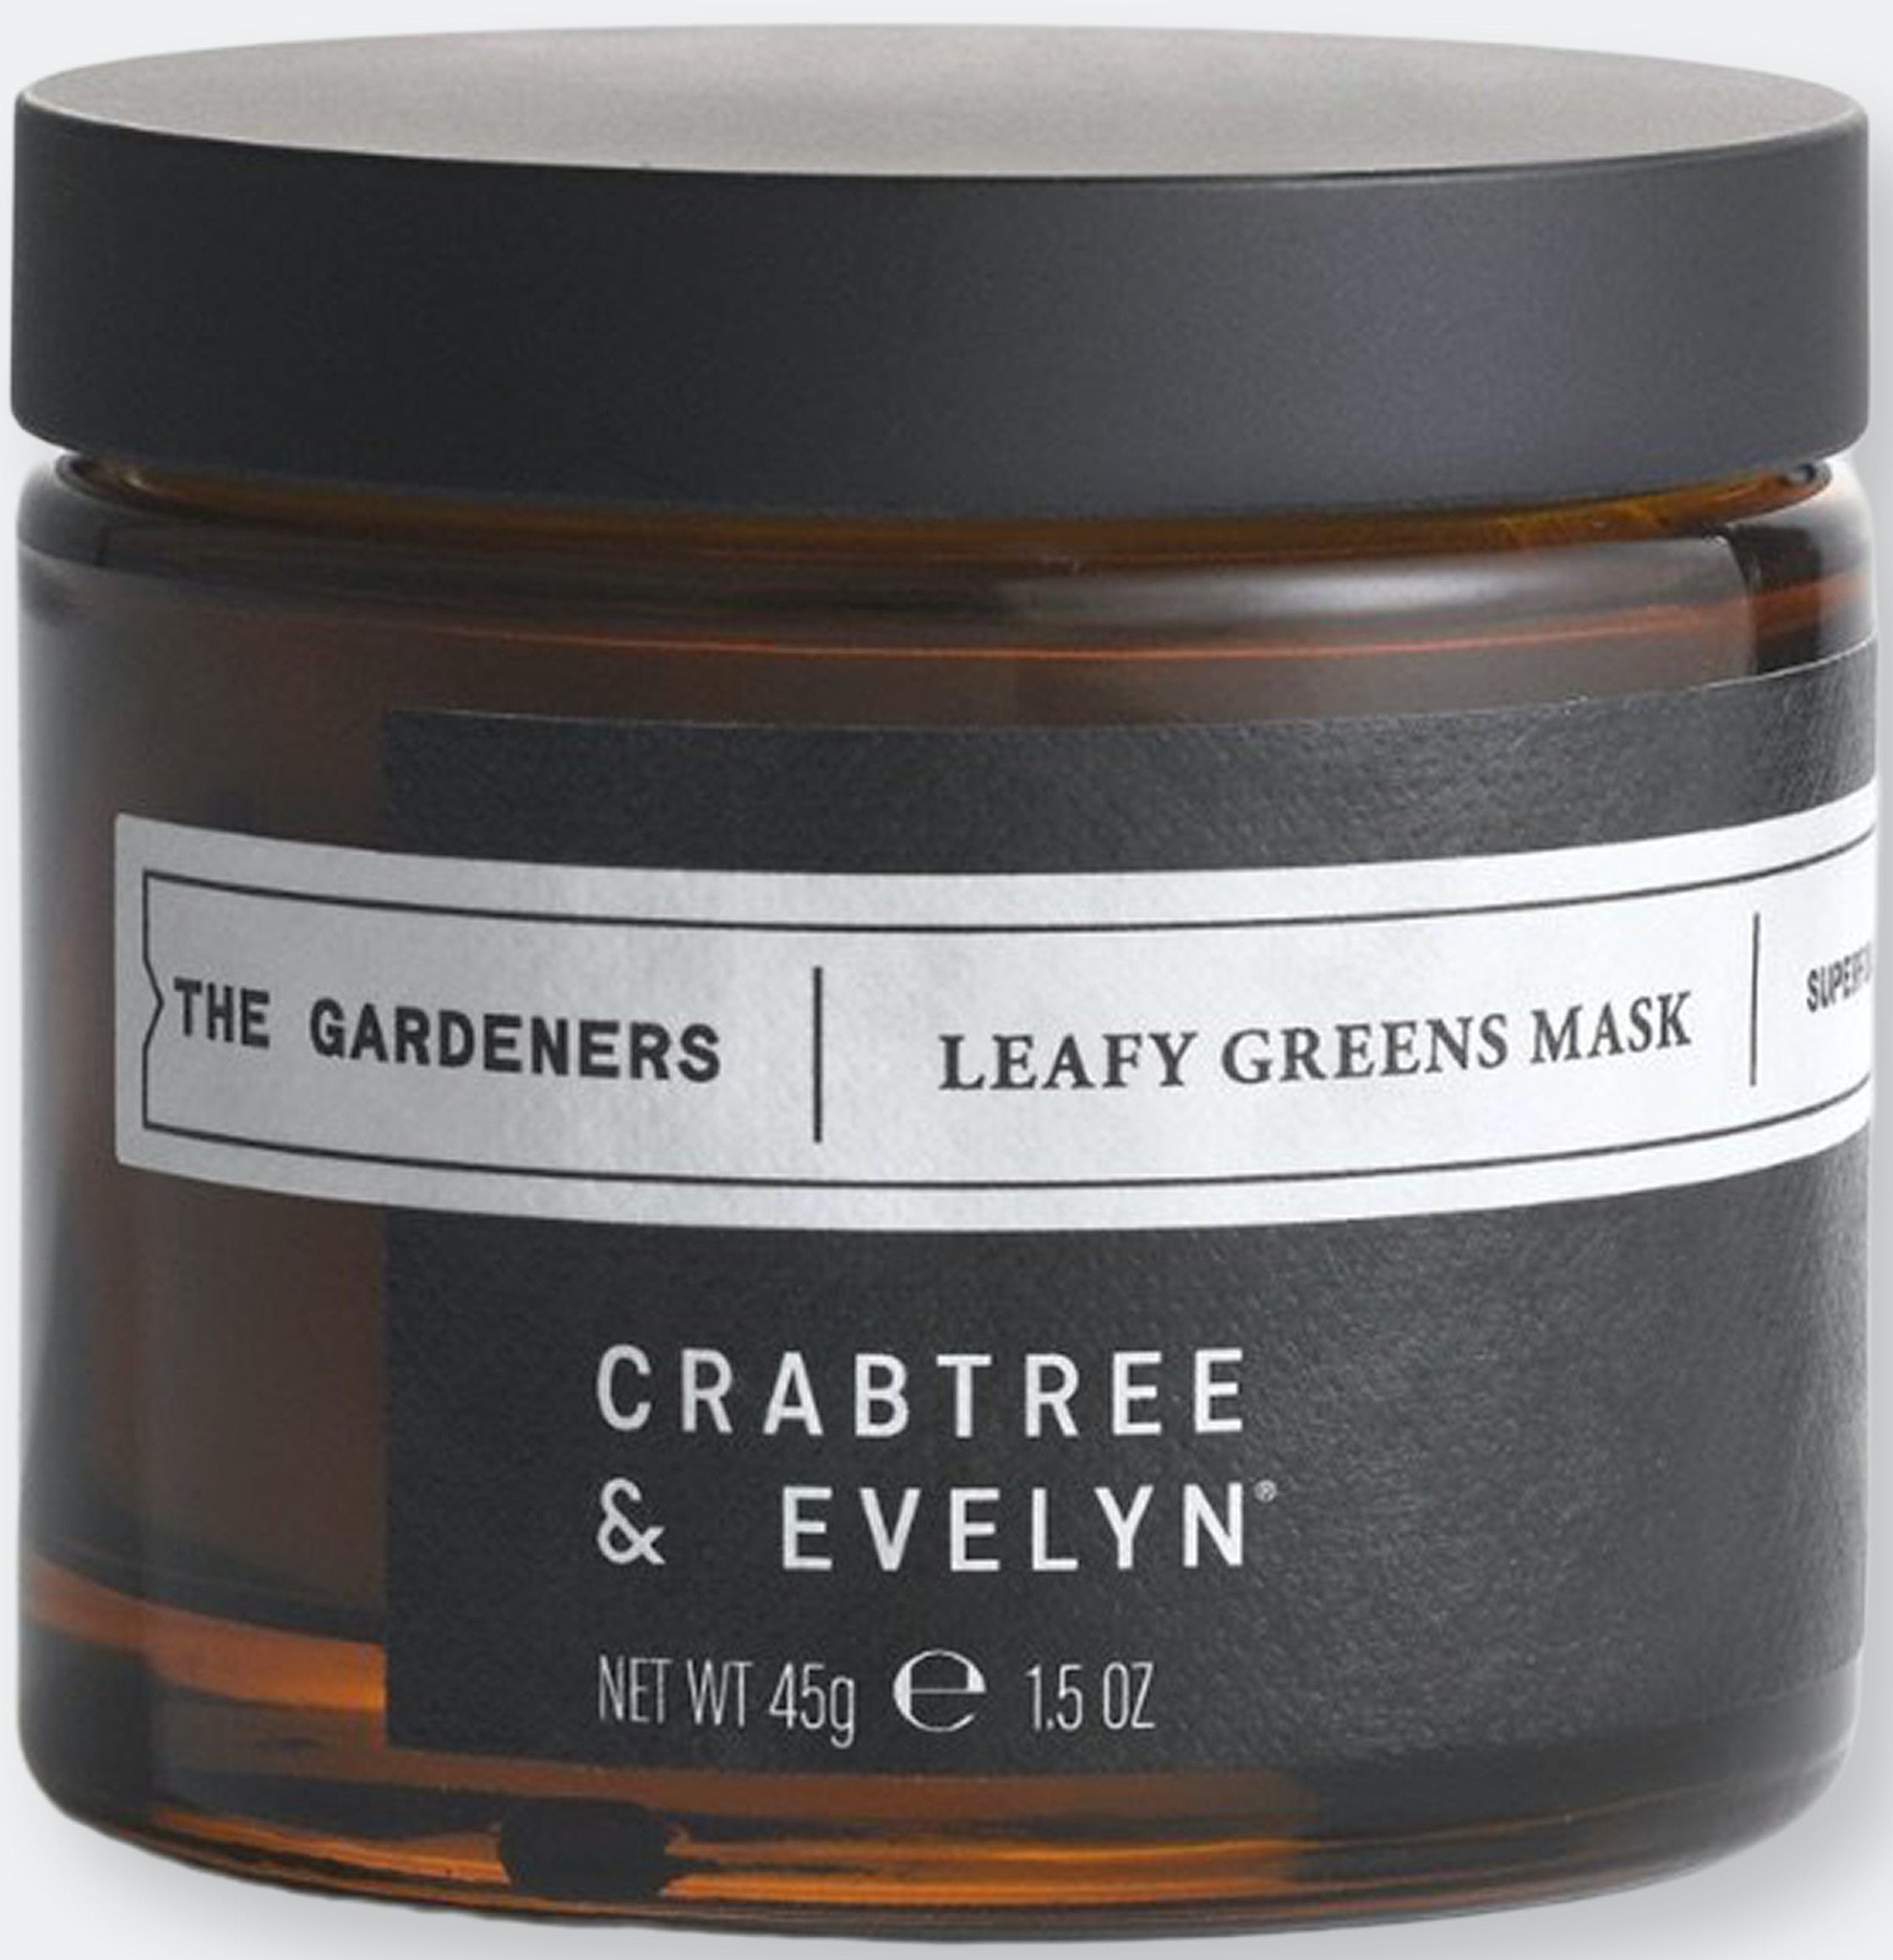 Crabtree & Evelyn Leafy Greens Mask